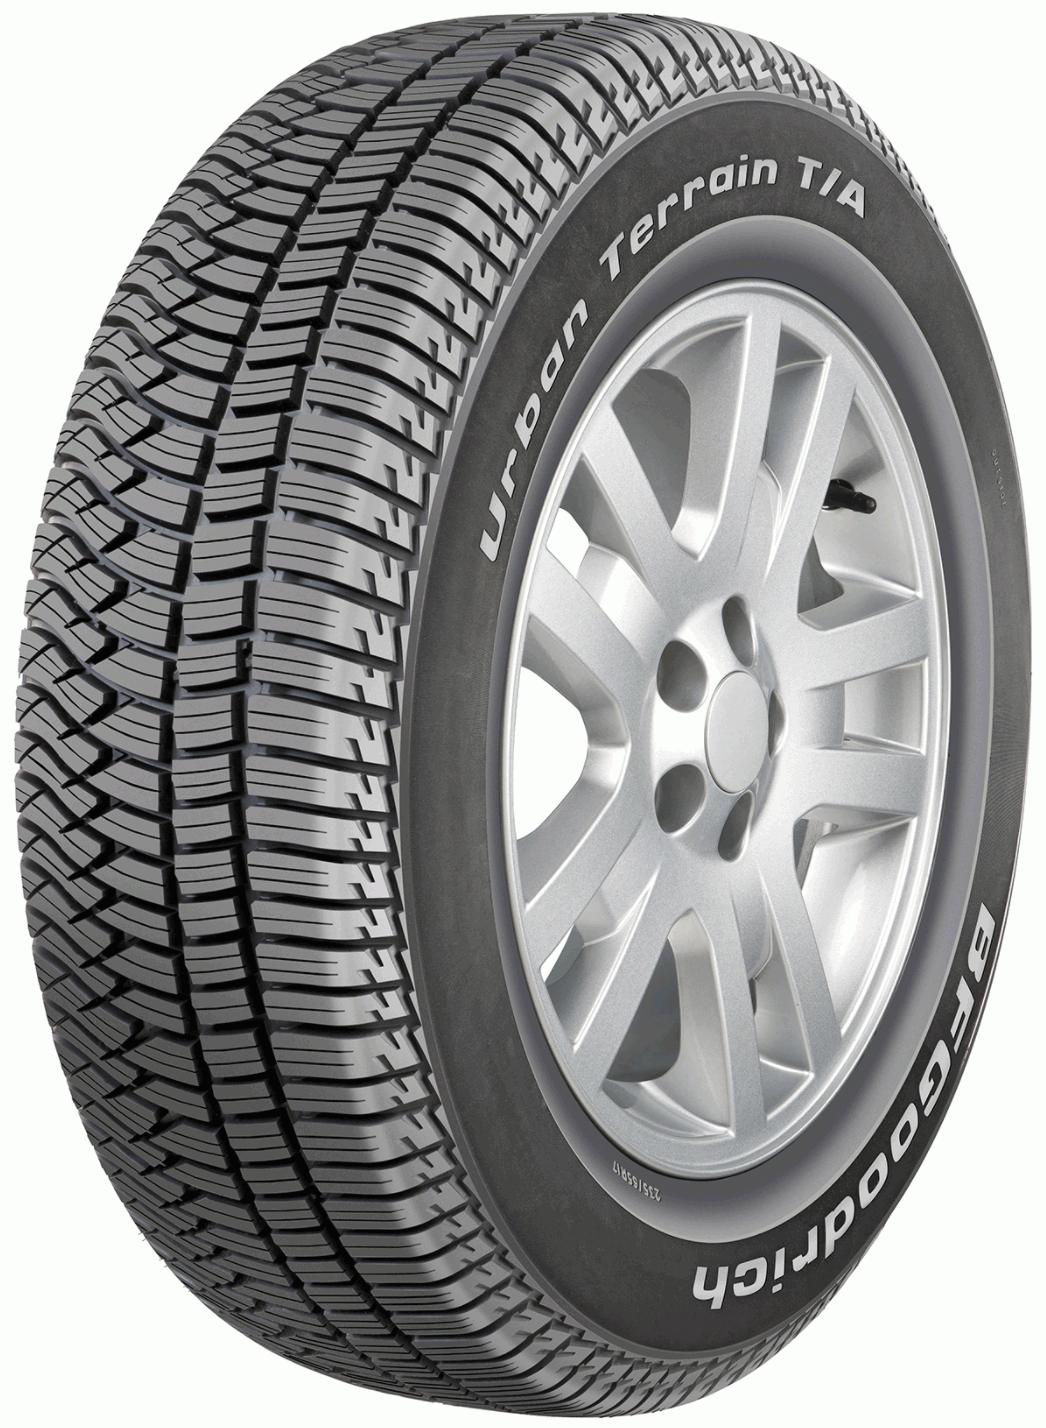 BFGoodrich Urban Terrain TA Page3 - Tyre Tests and Reviews @ Tyre Reviews